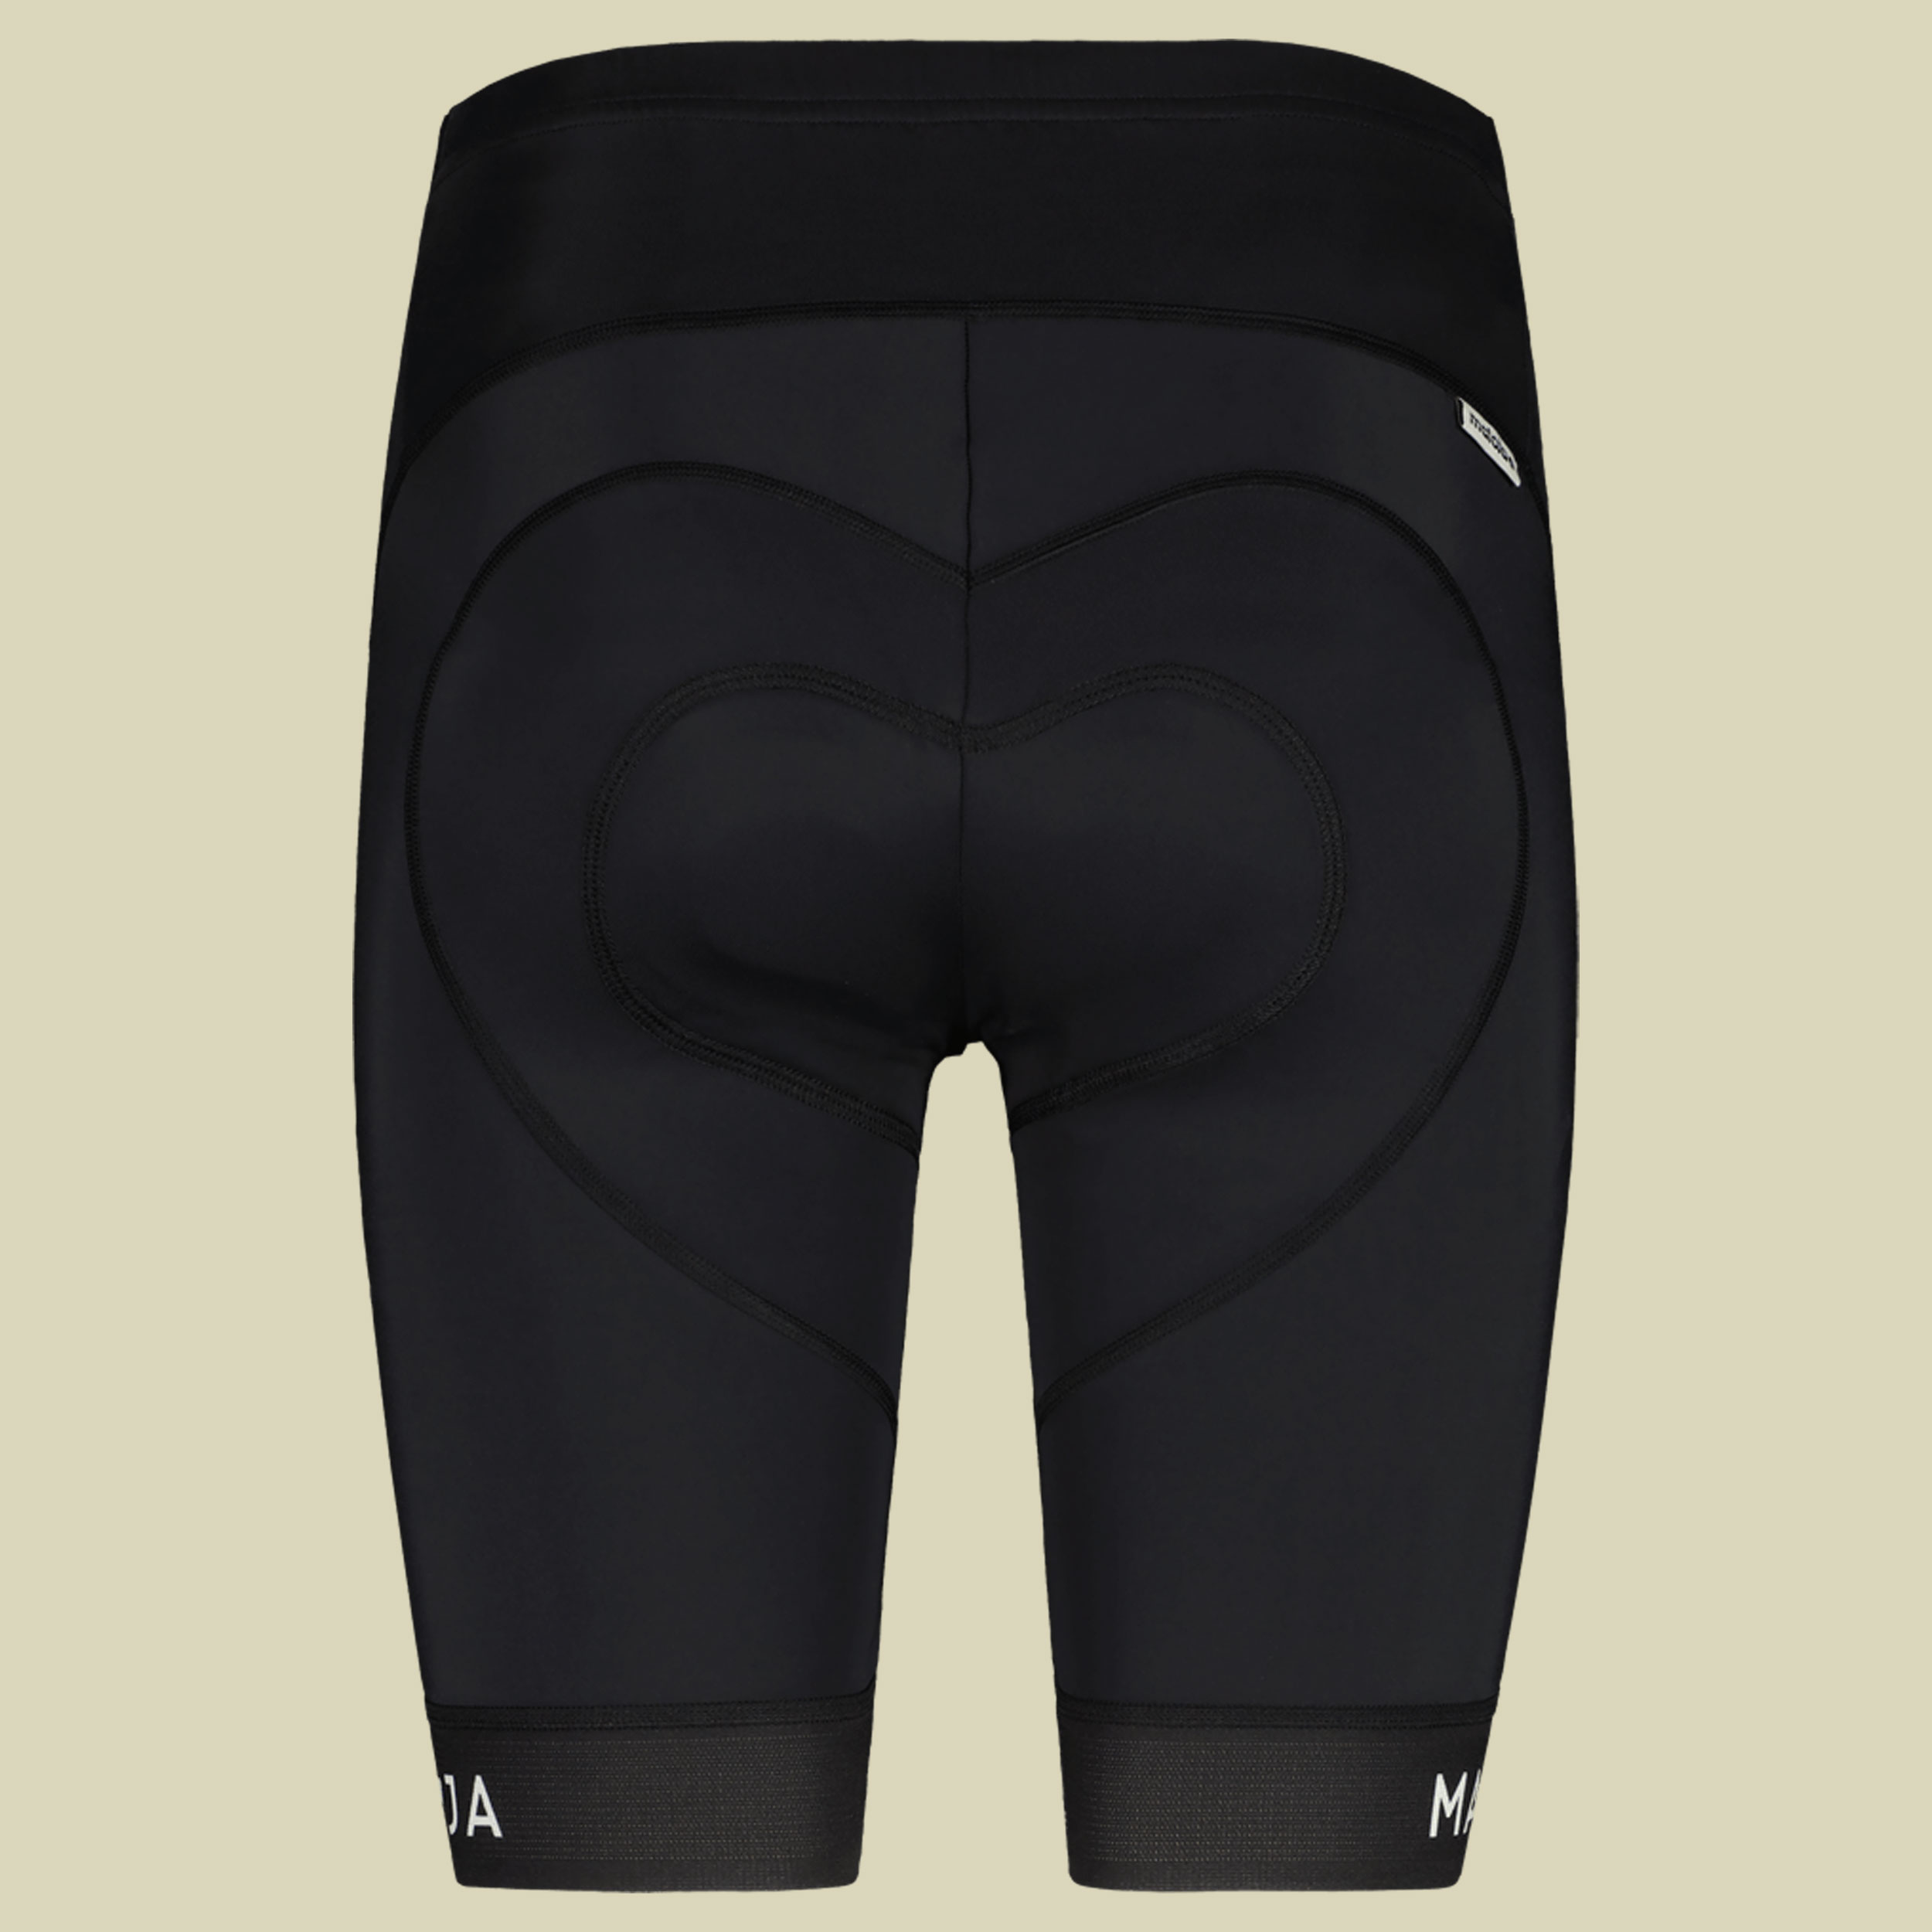 MinorM. 1/2 Cycle Tights Women Größe S Farbe moonless